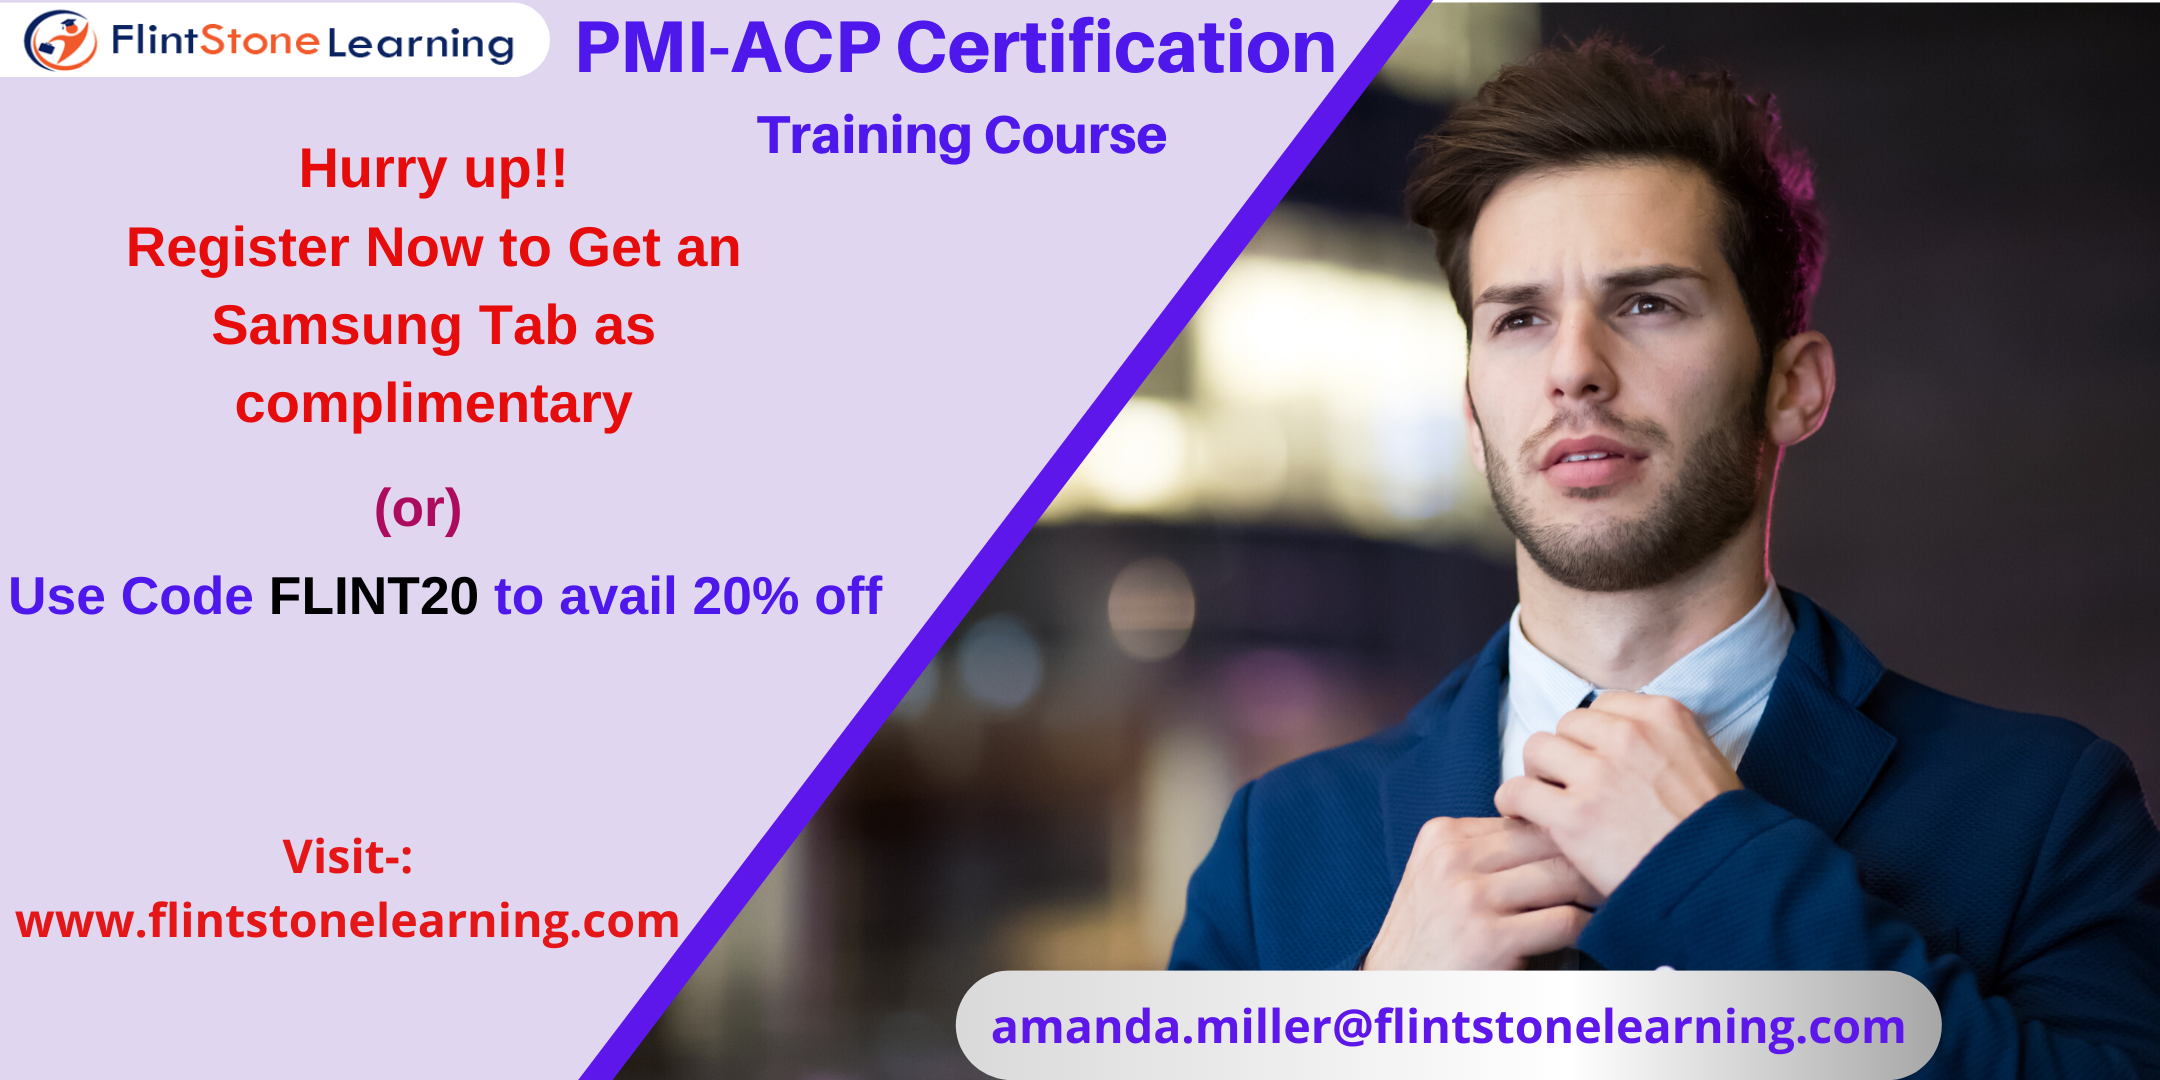 PMI-ACP Certification Training Course in Cardiff-by-the-Sea, CA